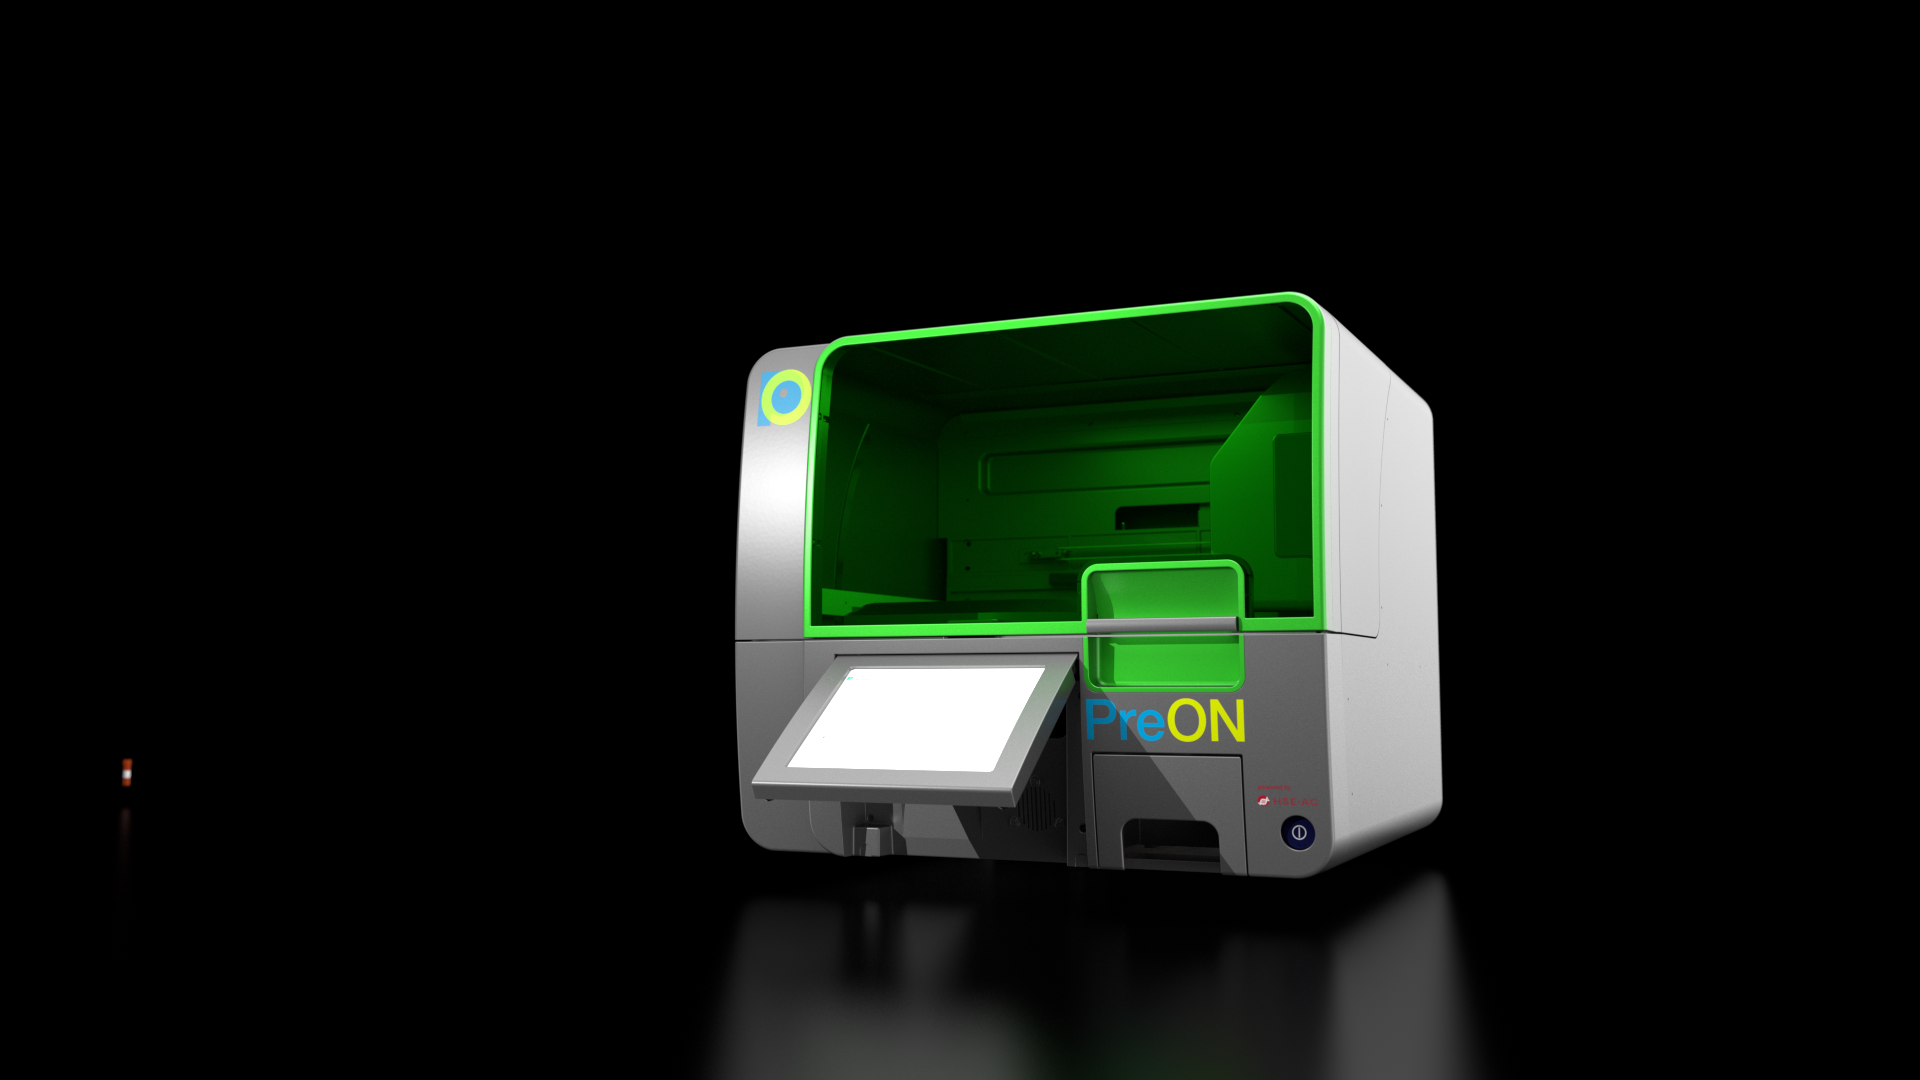 PRESS RELEASE: PreON — Fully Automated Protein Sample Preparation for Mass Spectrometry